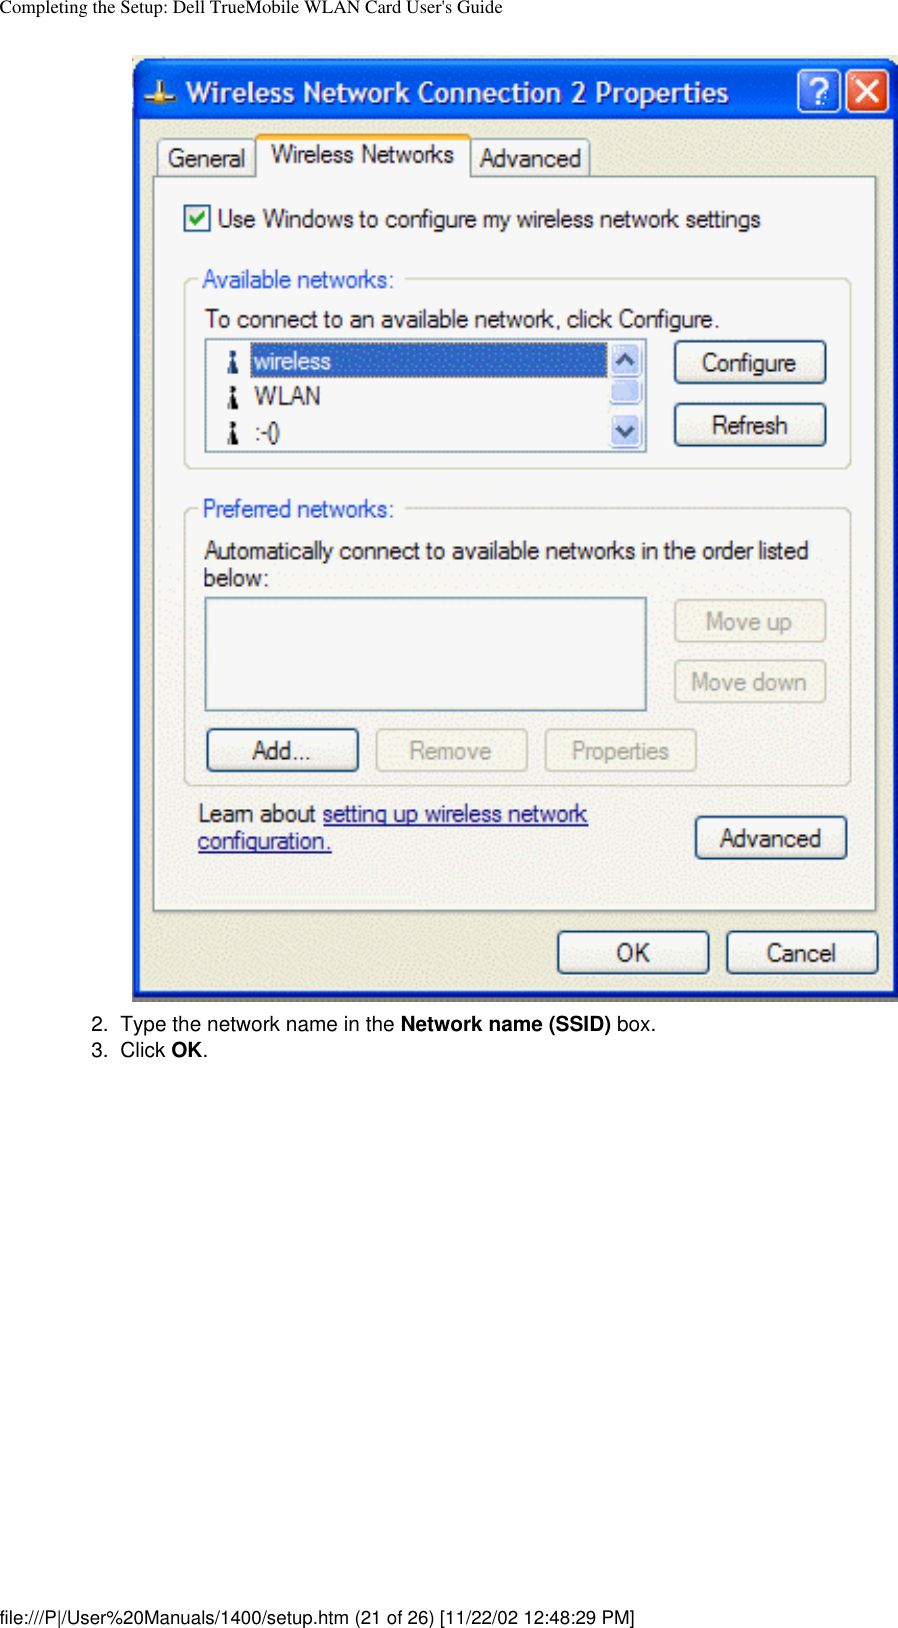 Completing the Setup: Dell TrueMobile WLAN Card User&apos;s Guide2.  Type the network name in the Network name (SSID) box.3.  Click OK. file:///P|/User%20Manuals/1400/setup.htm (21 of 26) [11/22/02 12:48:29 PM]